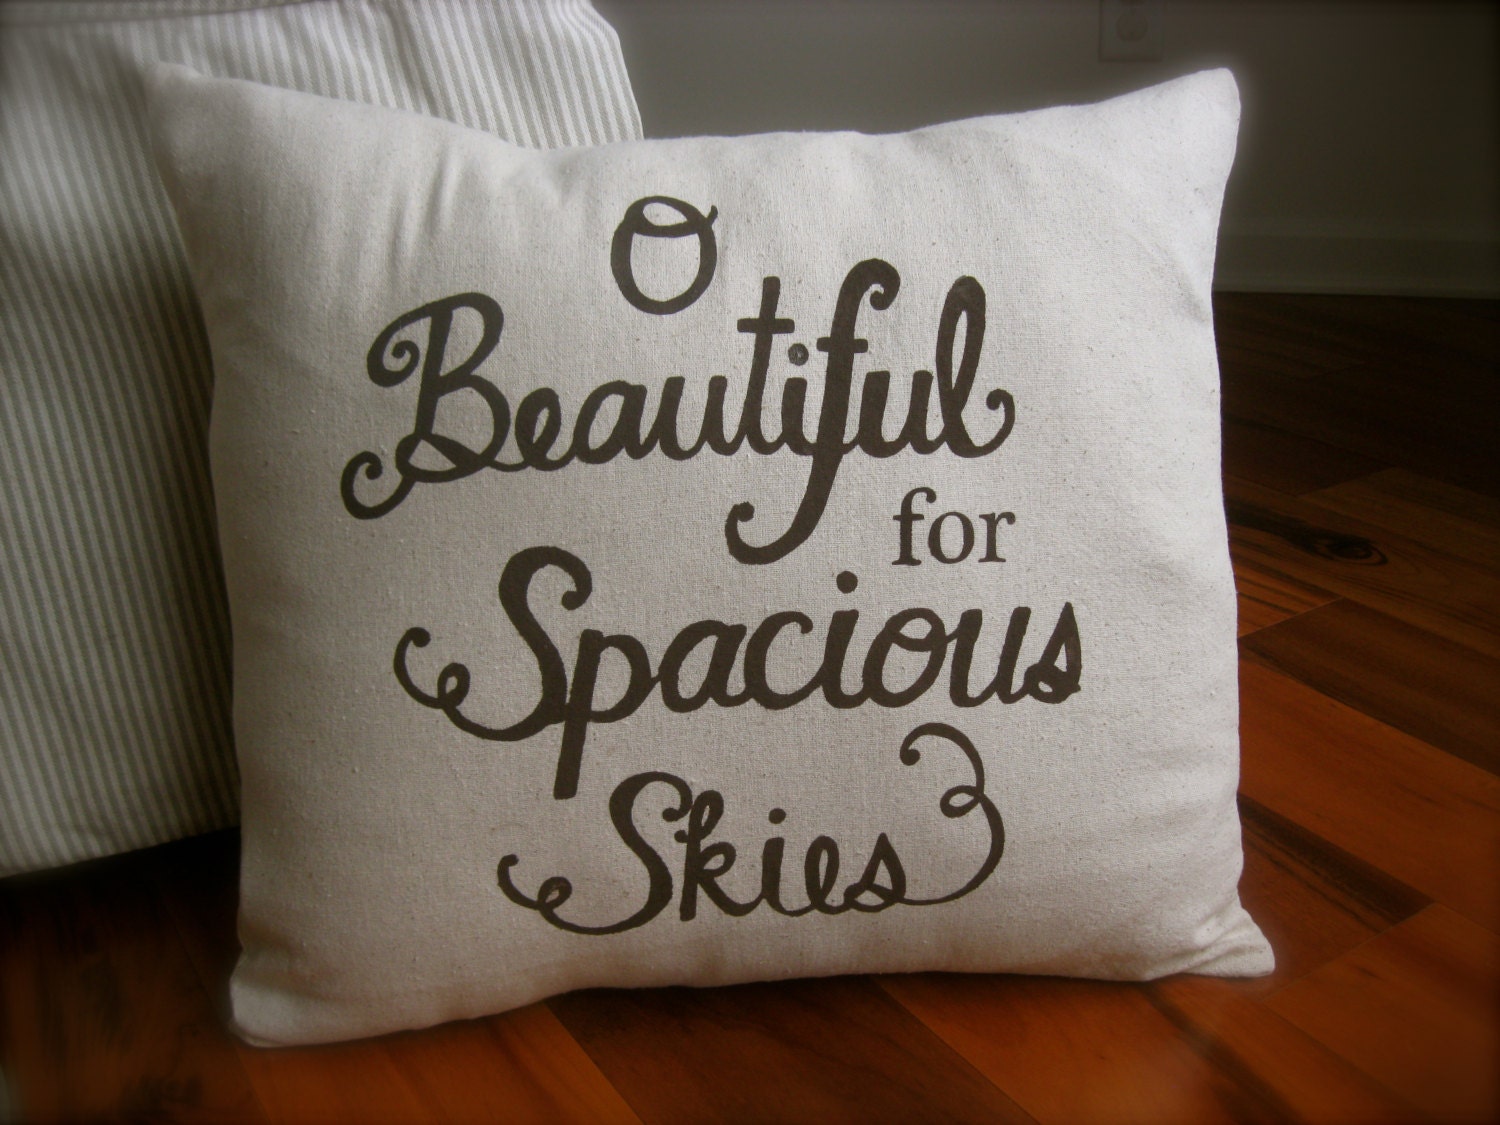 O Beautiful for Spacious Skies 18"x18" Pillow Cover in Natural Linen verse from America the Beautiful